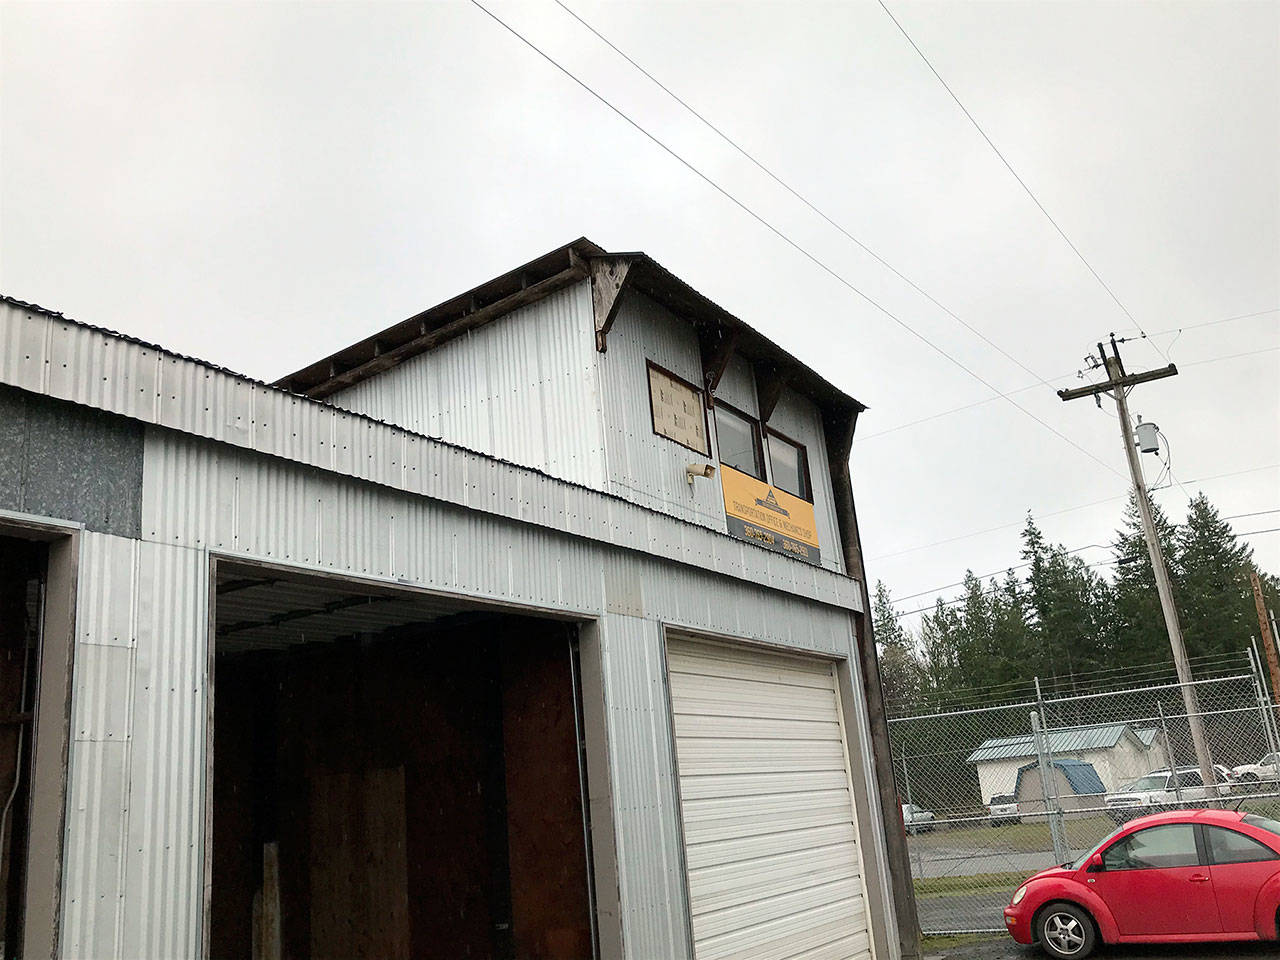 The Quilcene School District bus barn would be torn down and a new one built on the opposite side of Rose Street, if the Quilcene community agrees to pass the district’s capital levy that is on the Feb. 11 ballot. (Quilcene School District)